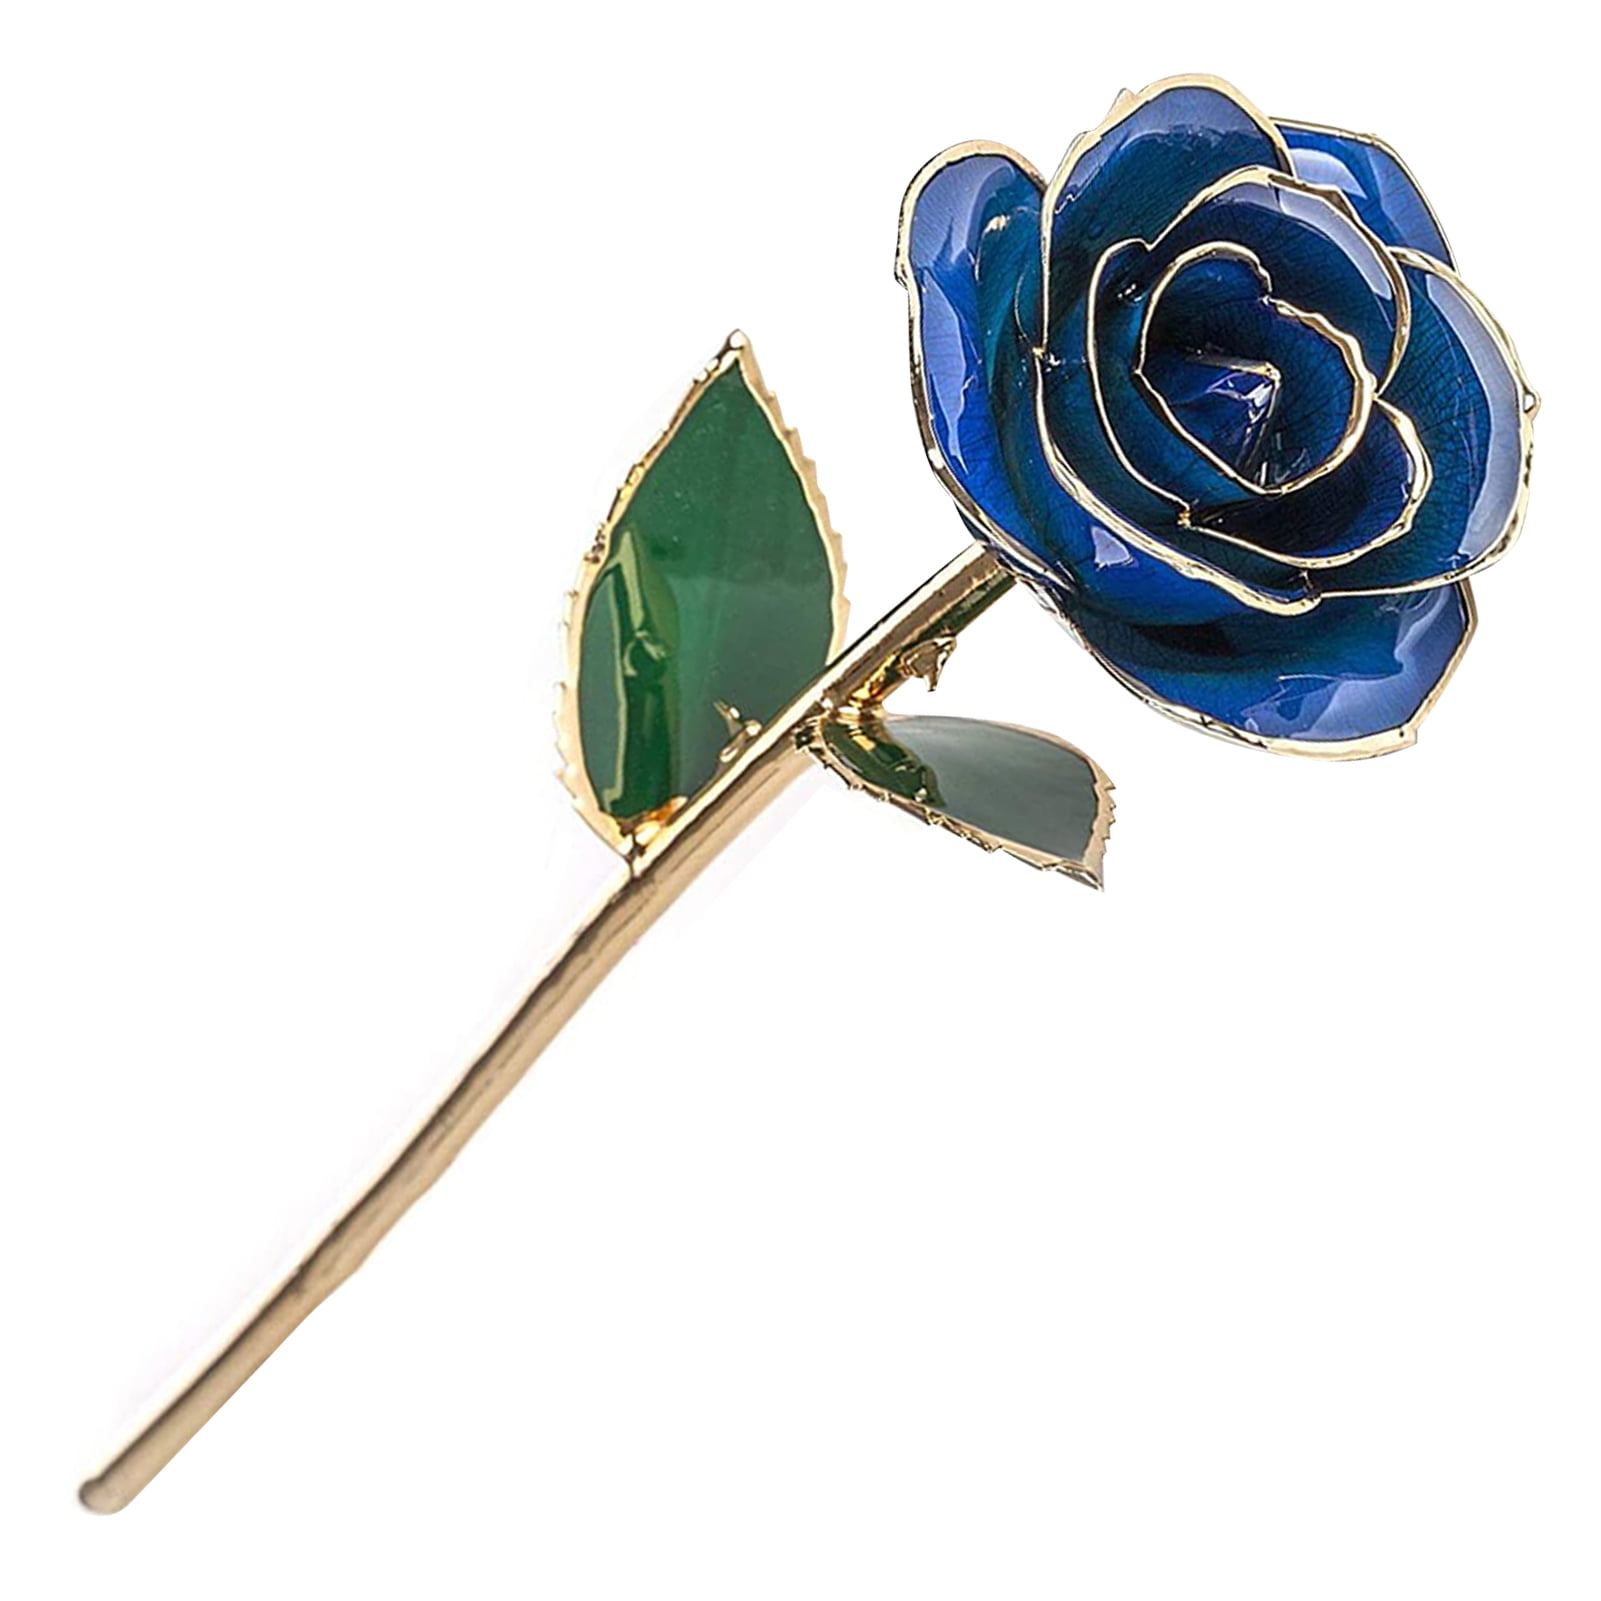 VALENTINE'S DAY! Dark Blue Rose by Living Gold Real Rose Dipped in 24k Gold 